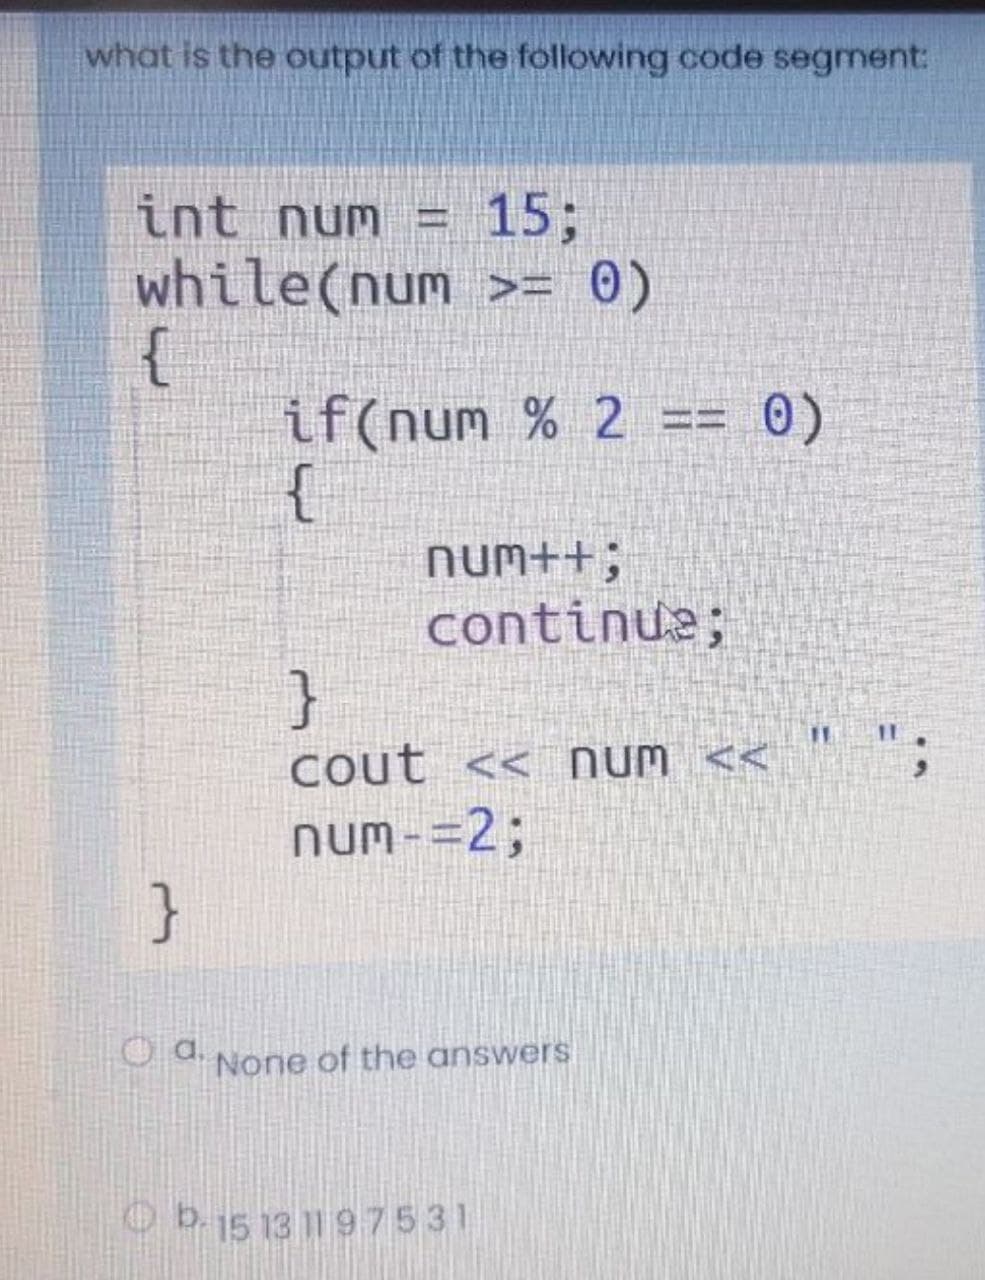 what is the output of the following code segment:
int num = 15;
while(num >= 0)
{
if(num % 2
{
0)
Num++;
continue;
}
Cout << Num <<
num-=2;
}
P d None of the answers
Ob.15 13 1197531
